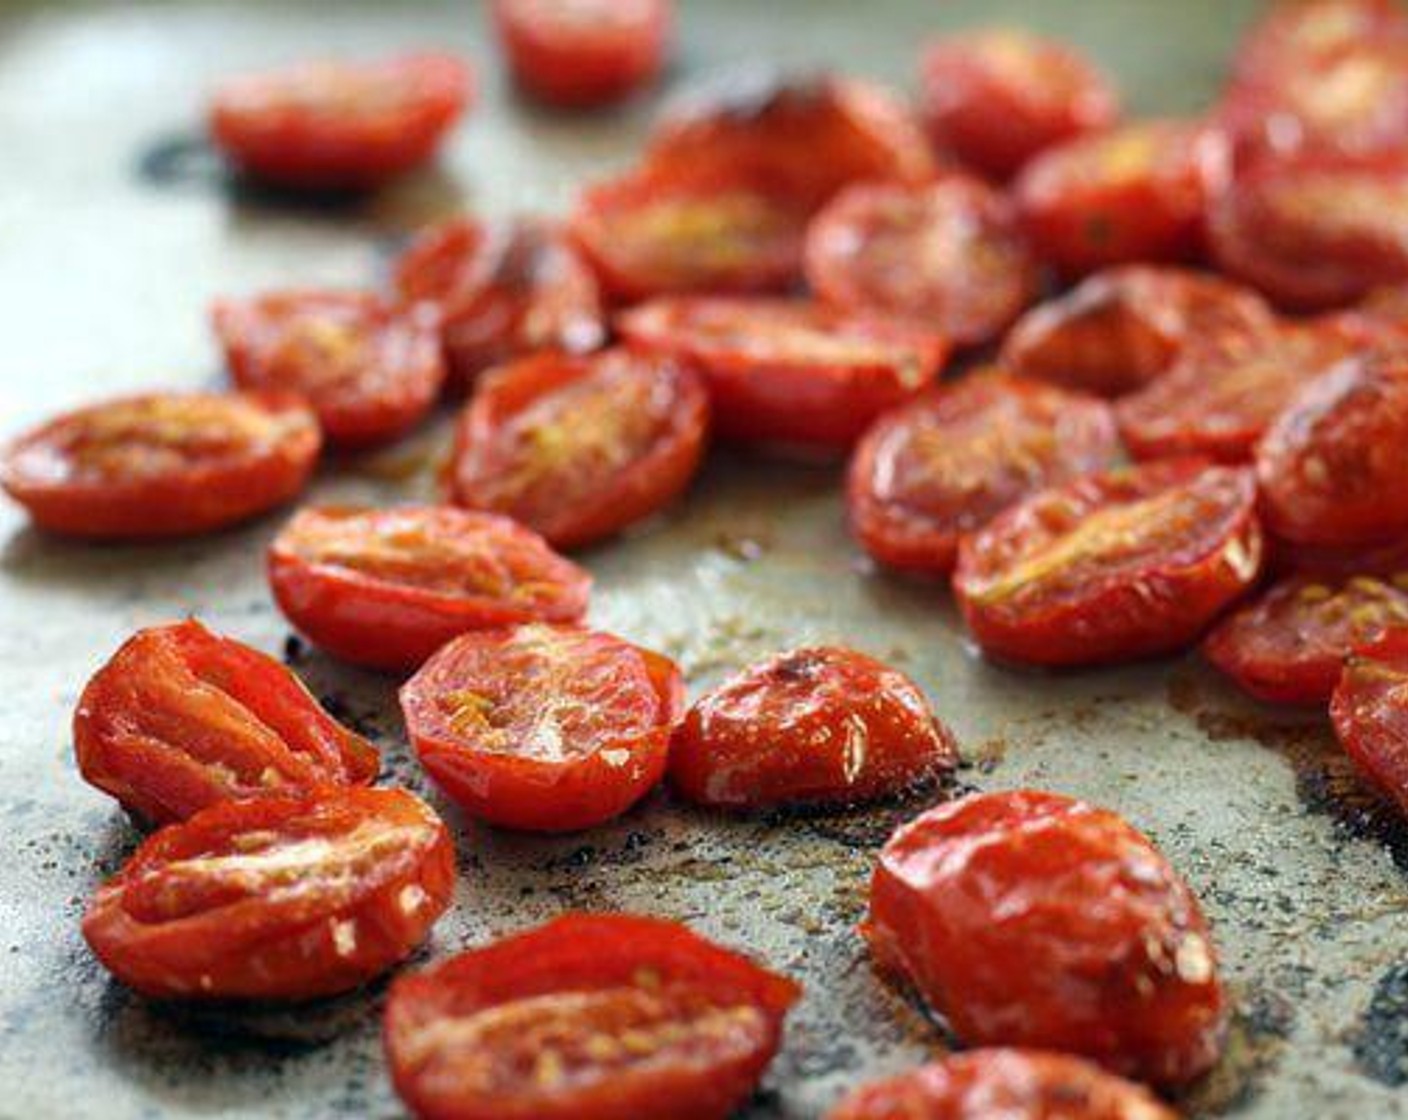 step 4 Turn broiler on in your oven. On a shallow baking pan, toss the Cherry Tomatoes (2 cups) and Olive Oil (2 Tbsp). Broil for approximately 7-10 minutes until slightly browned. Remove from oven.